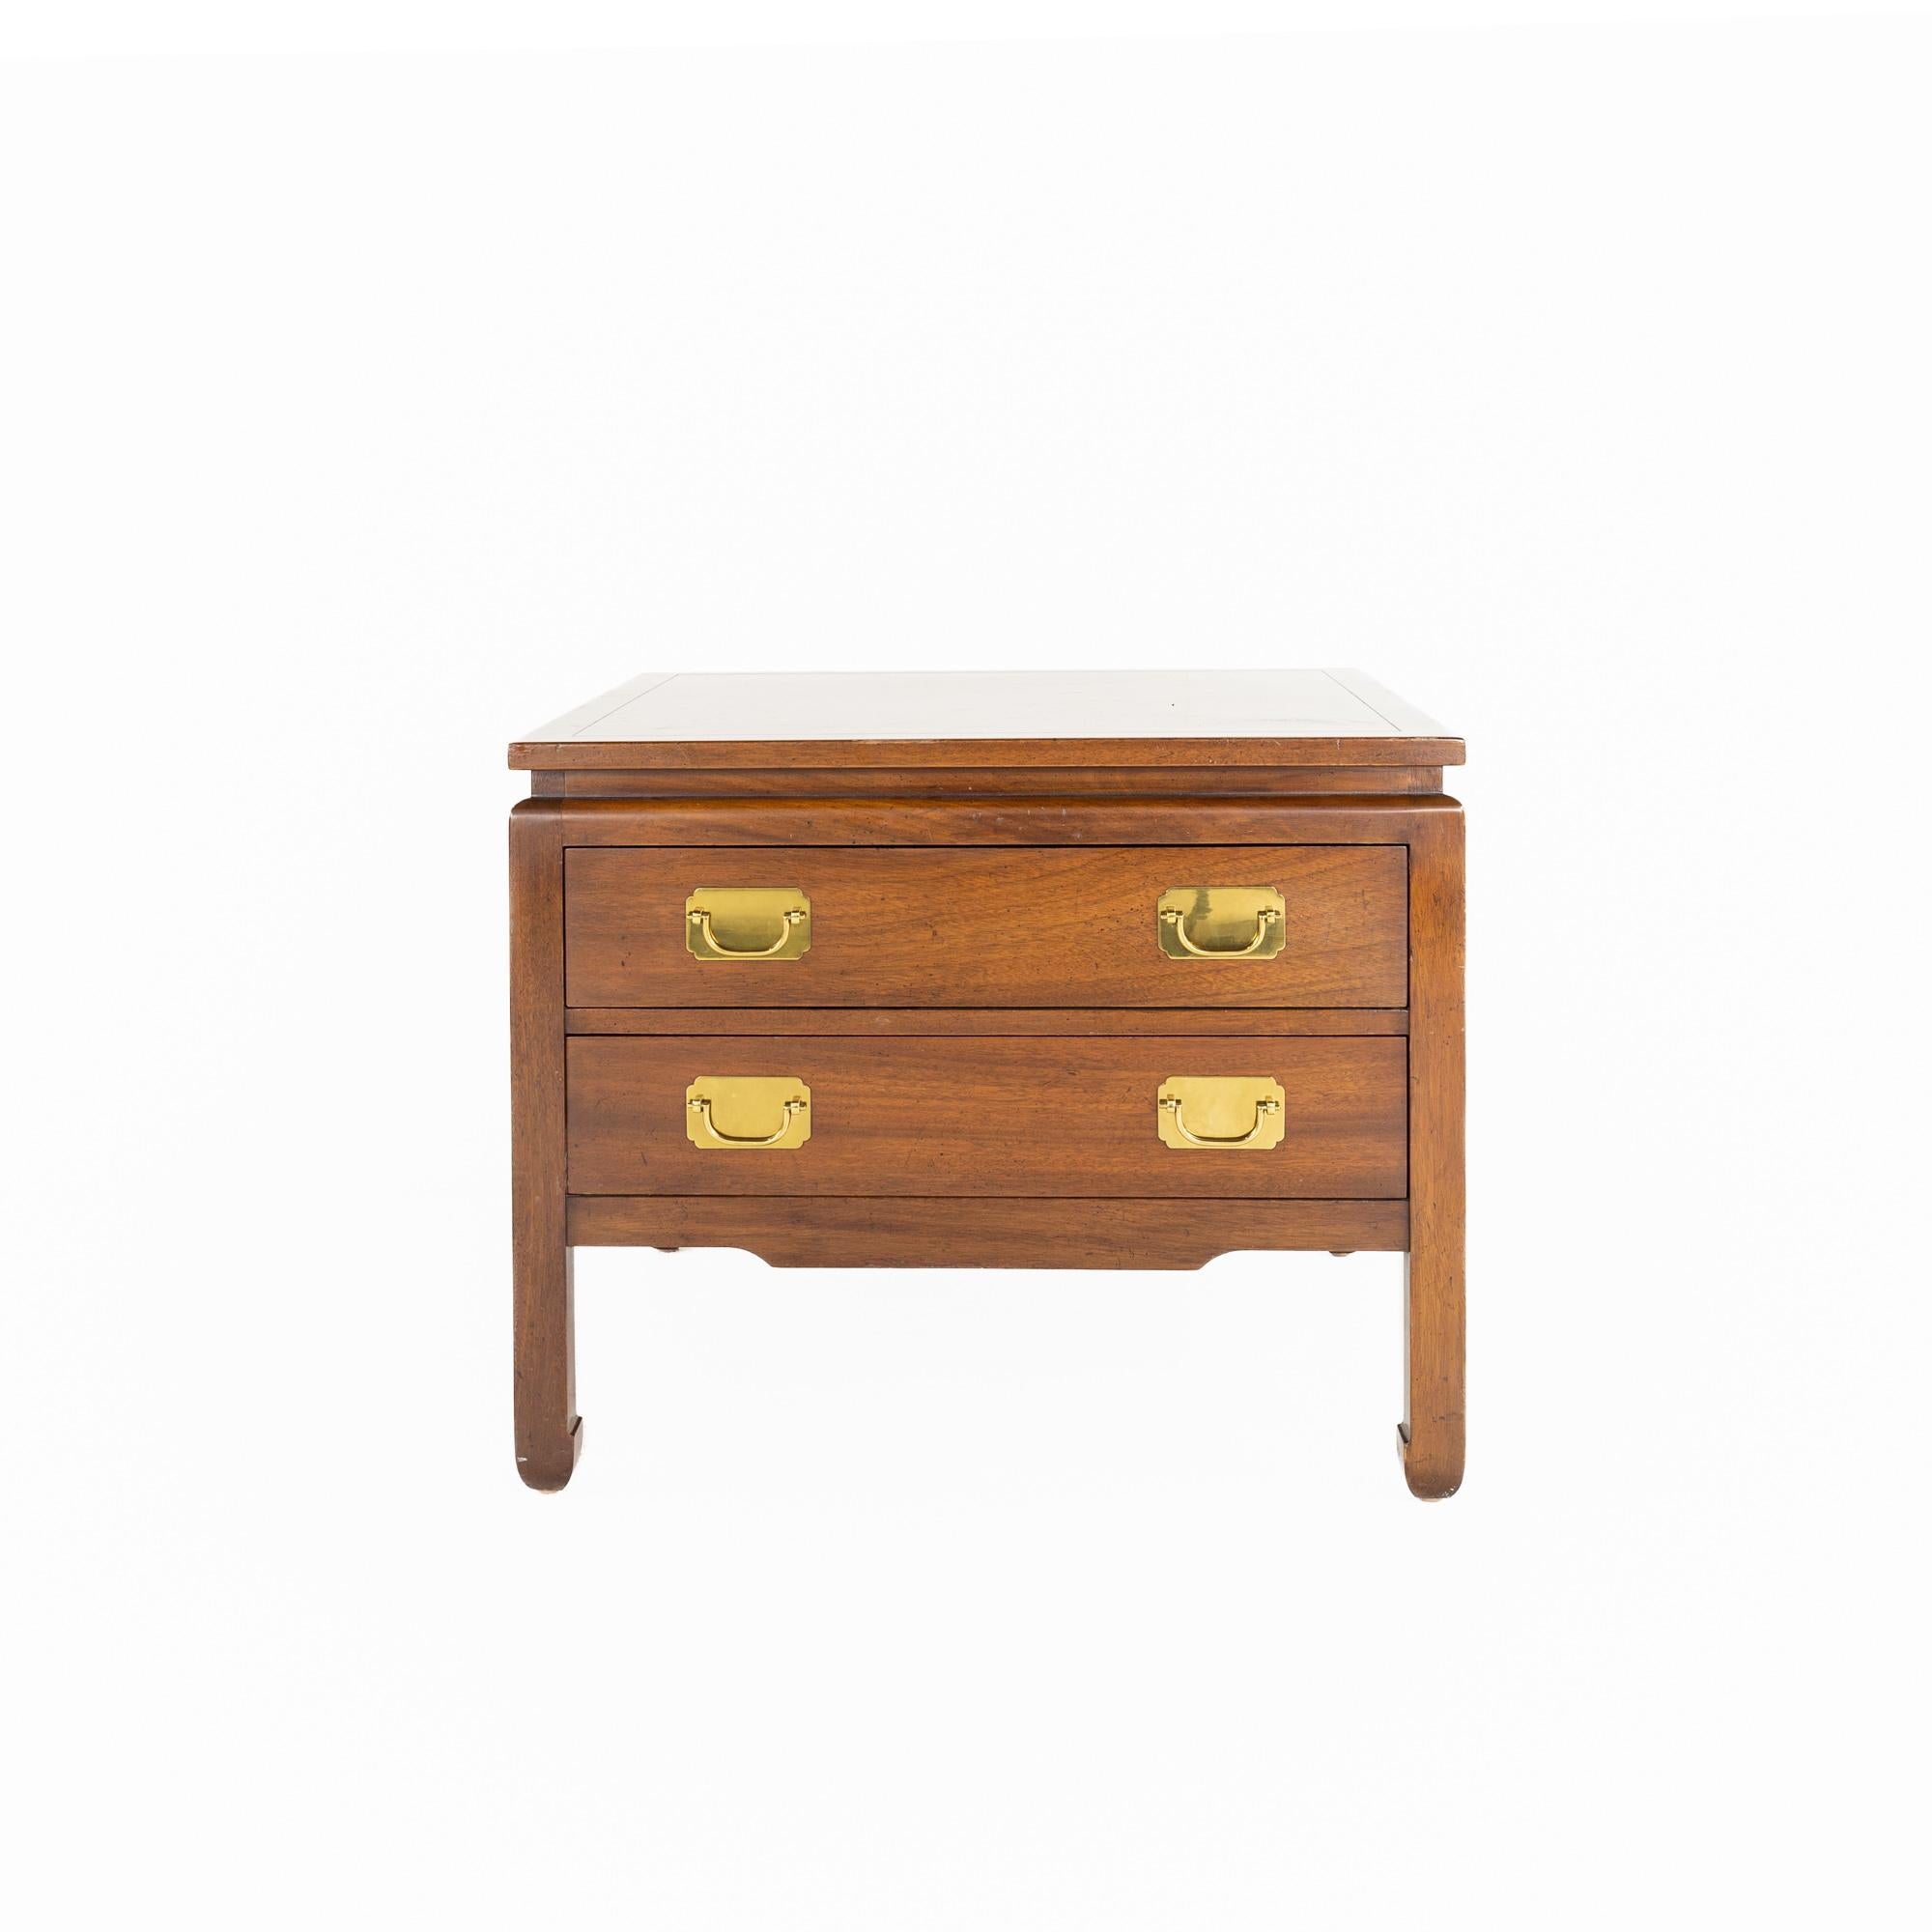 Kittinger mid century mahogany end table

This end table measures: 28 wide x 28 deep x 23 inches high

All pieces of furniture can be had in what we call restored vintage condition. That means the piece is restored upon purchase so it’s free of